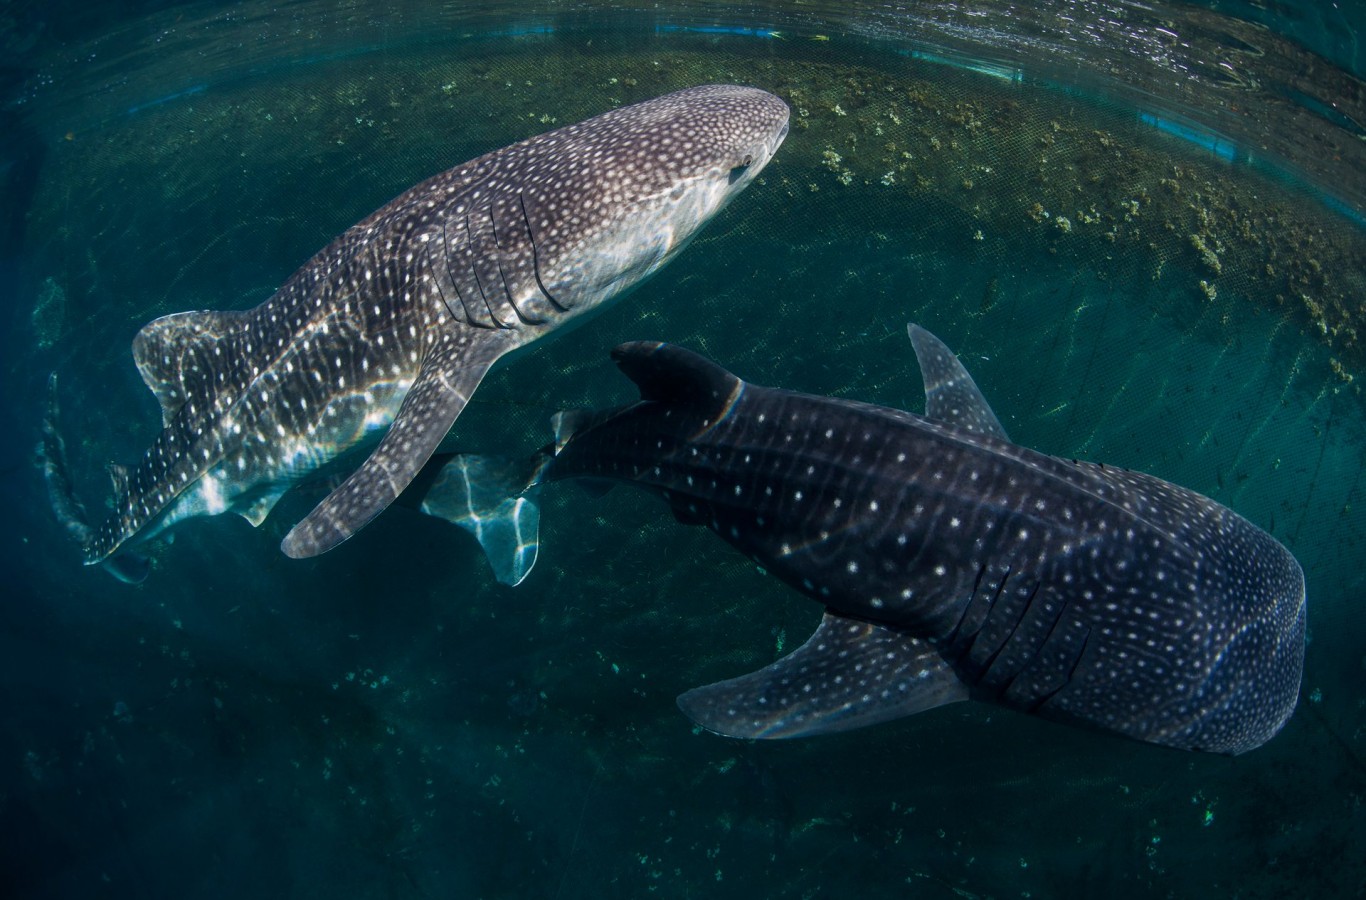 The whale sharks as they were released from their holding pen